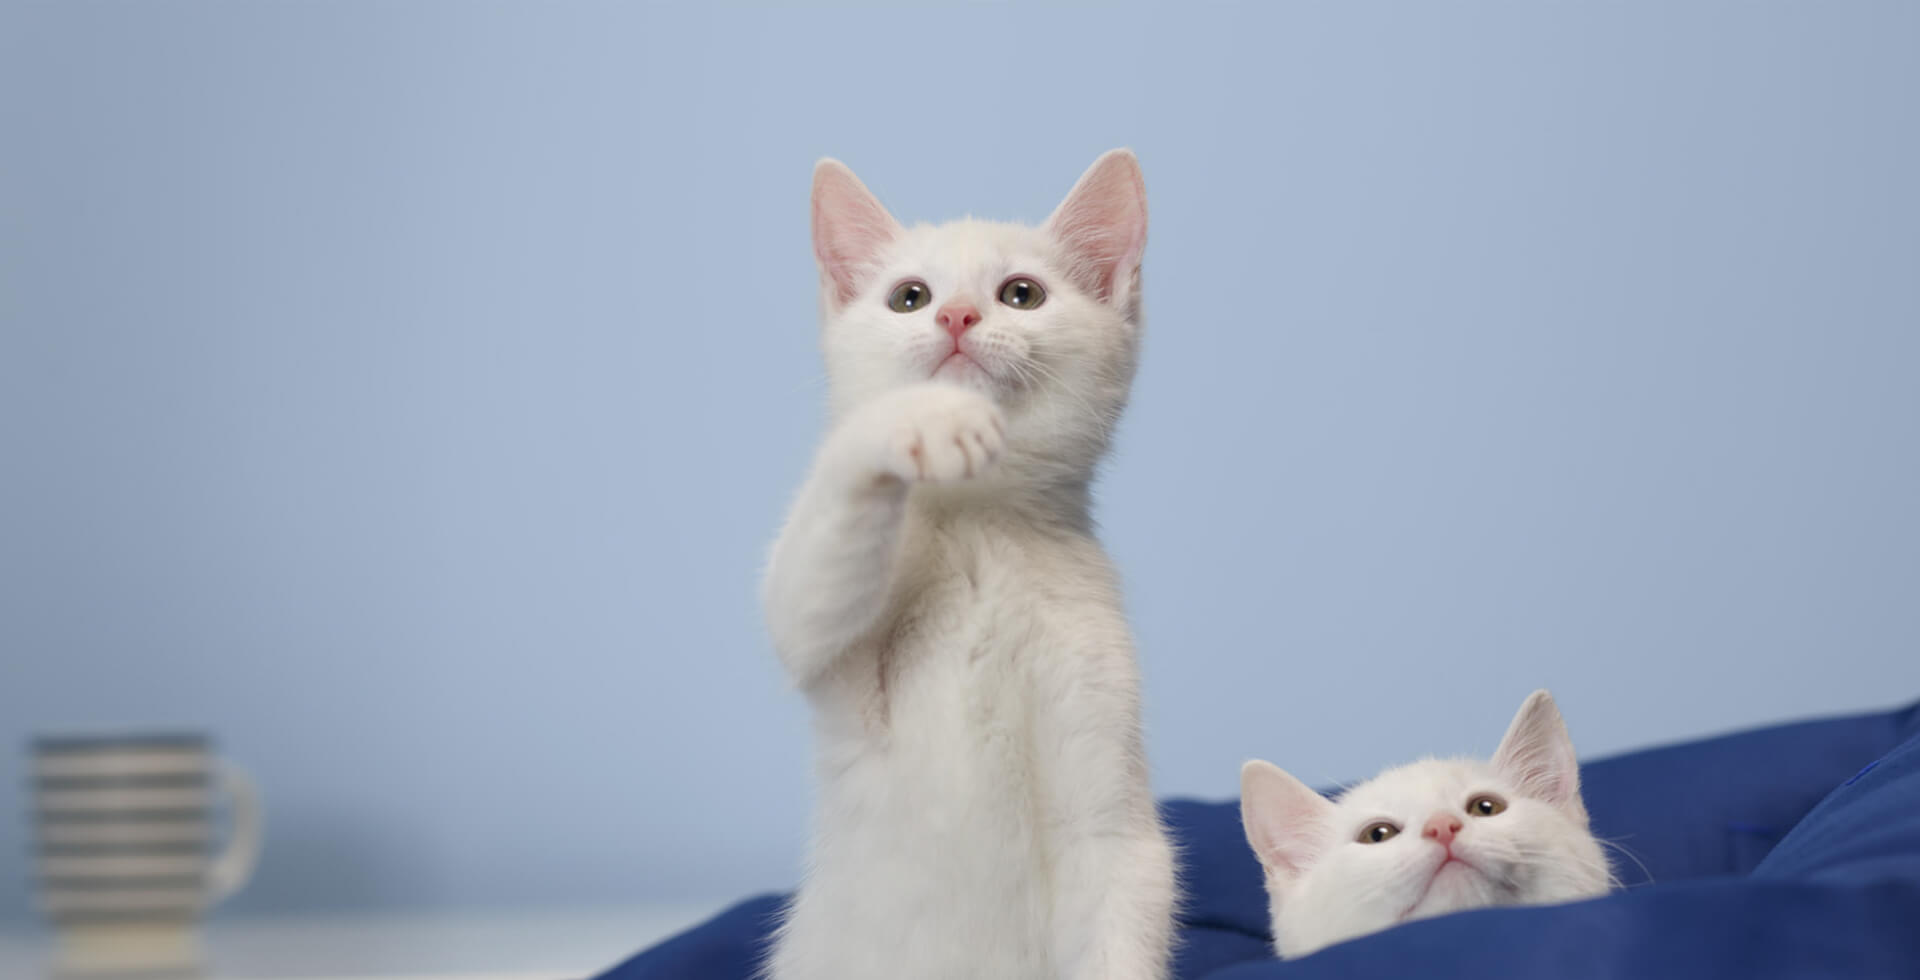 Two kittens in a blue room, looking up above the top of the frame